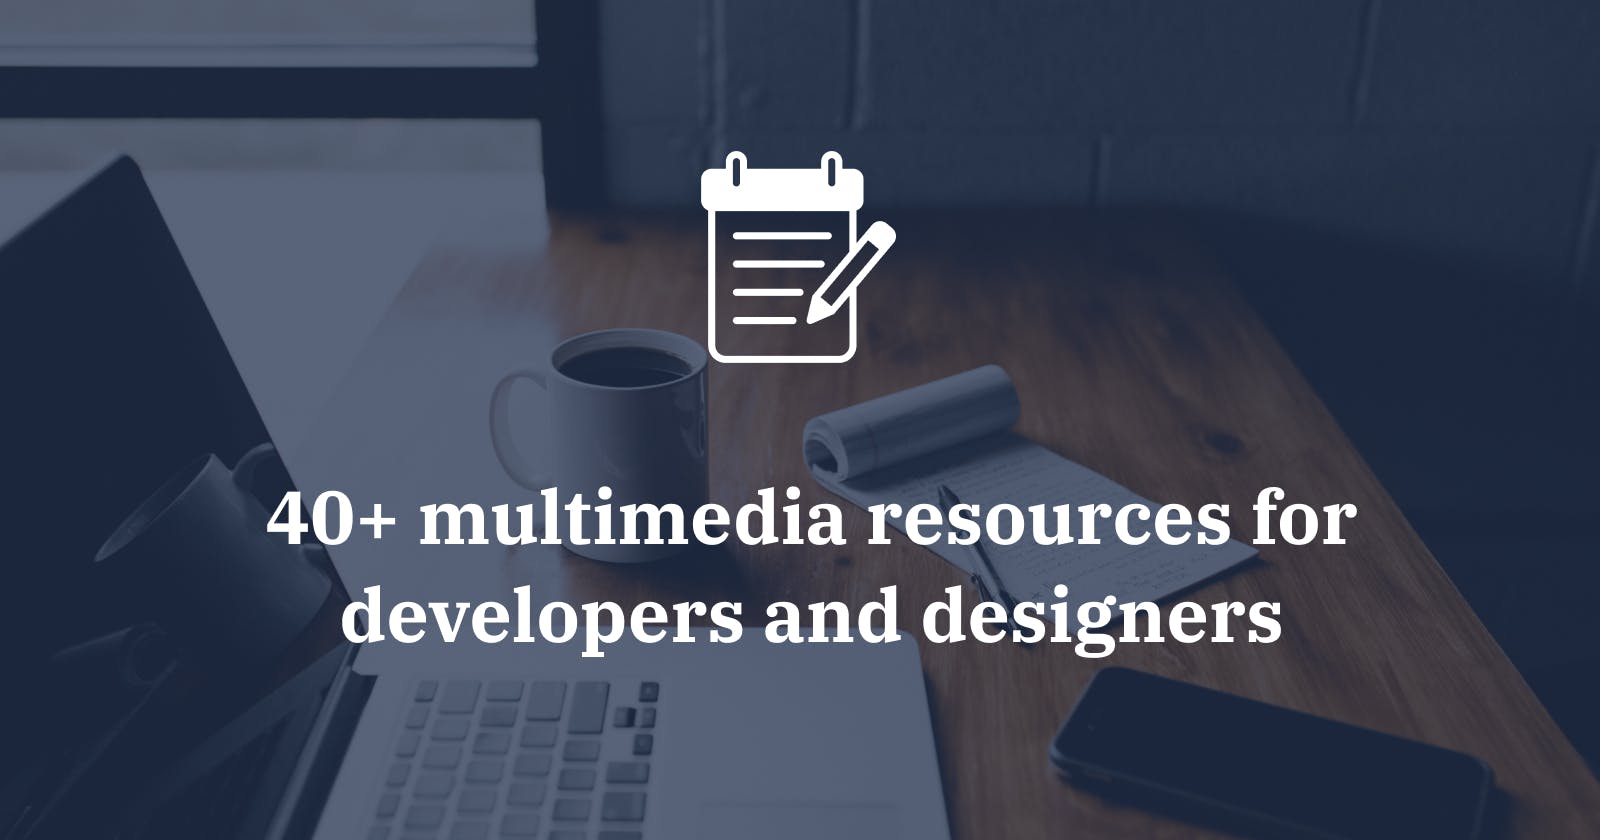 40+ multimedia resources for developers and designers